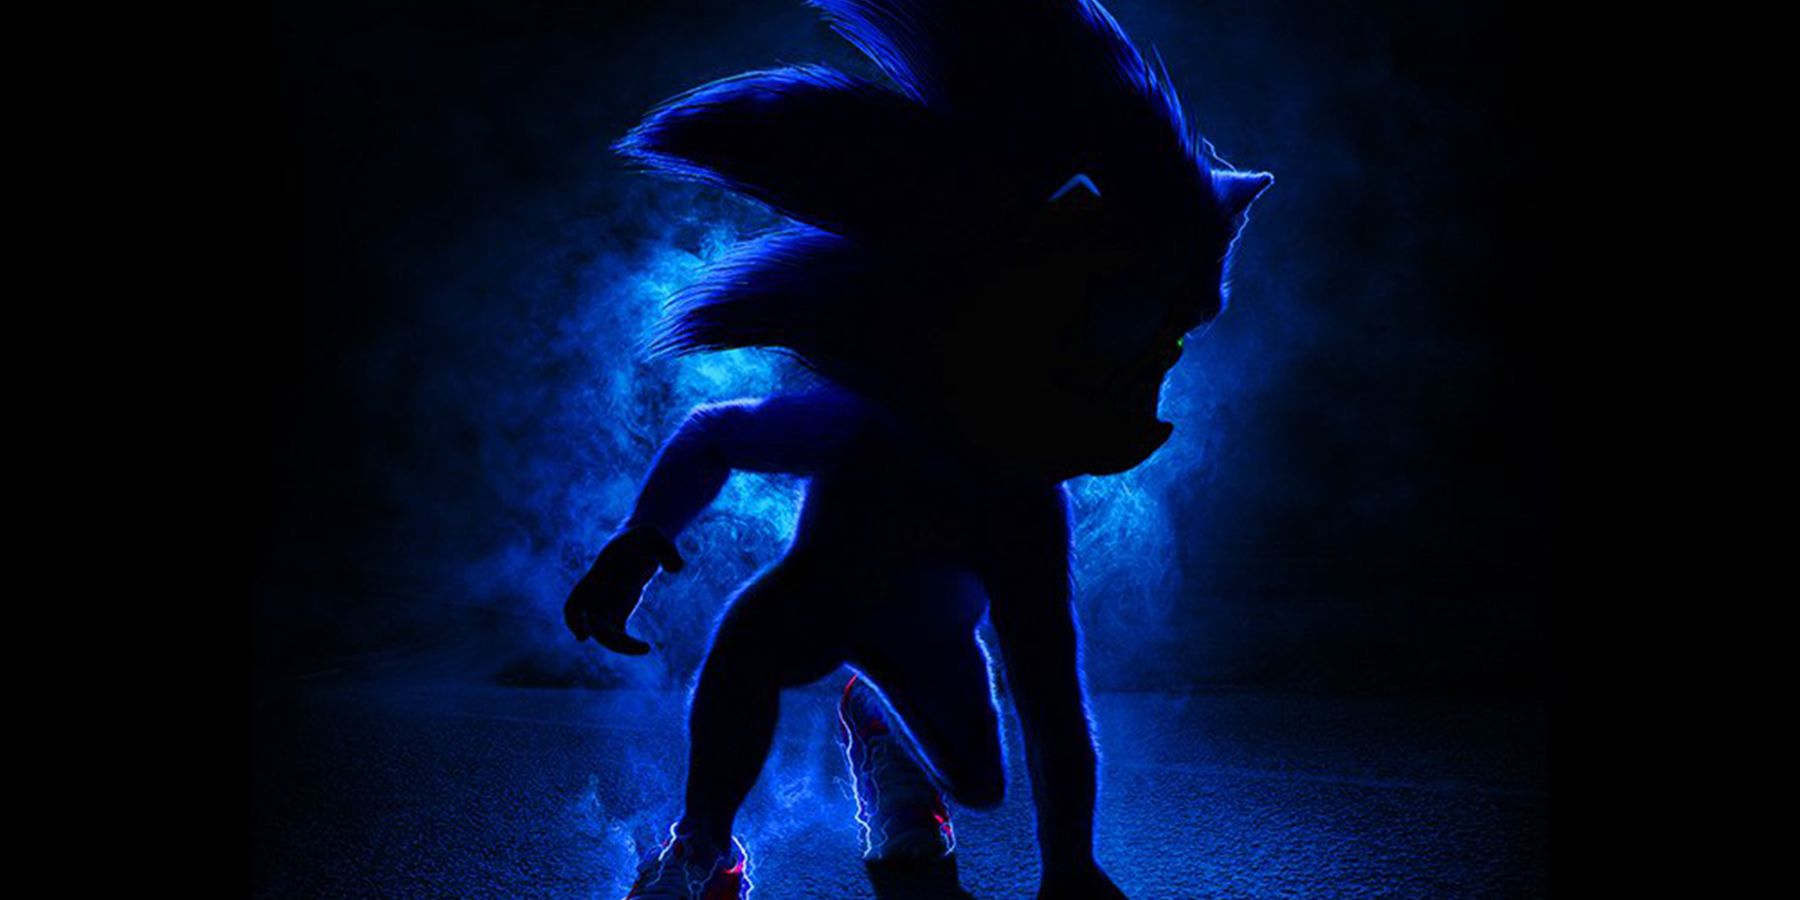 Leaked Sonic movie style guide sheds light on hedgehog's form